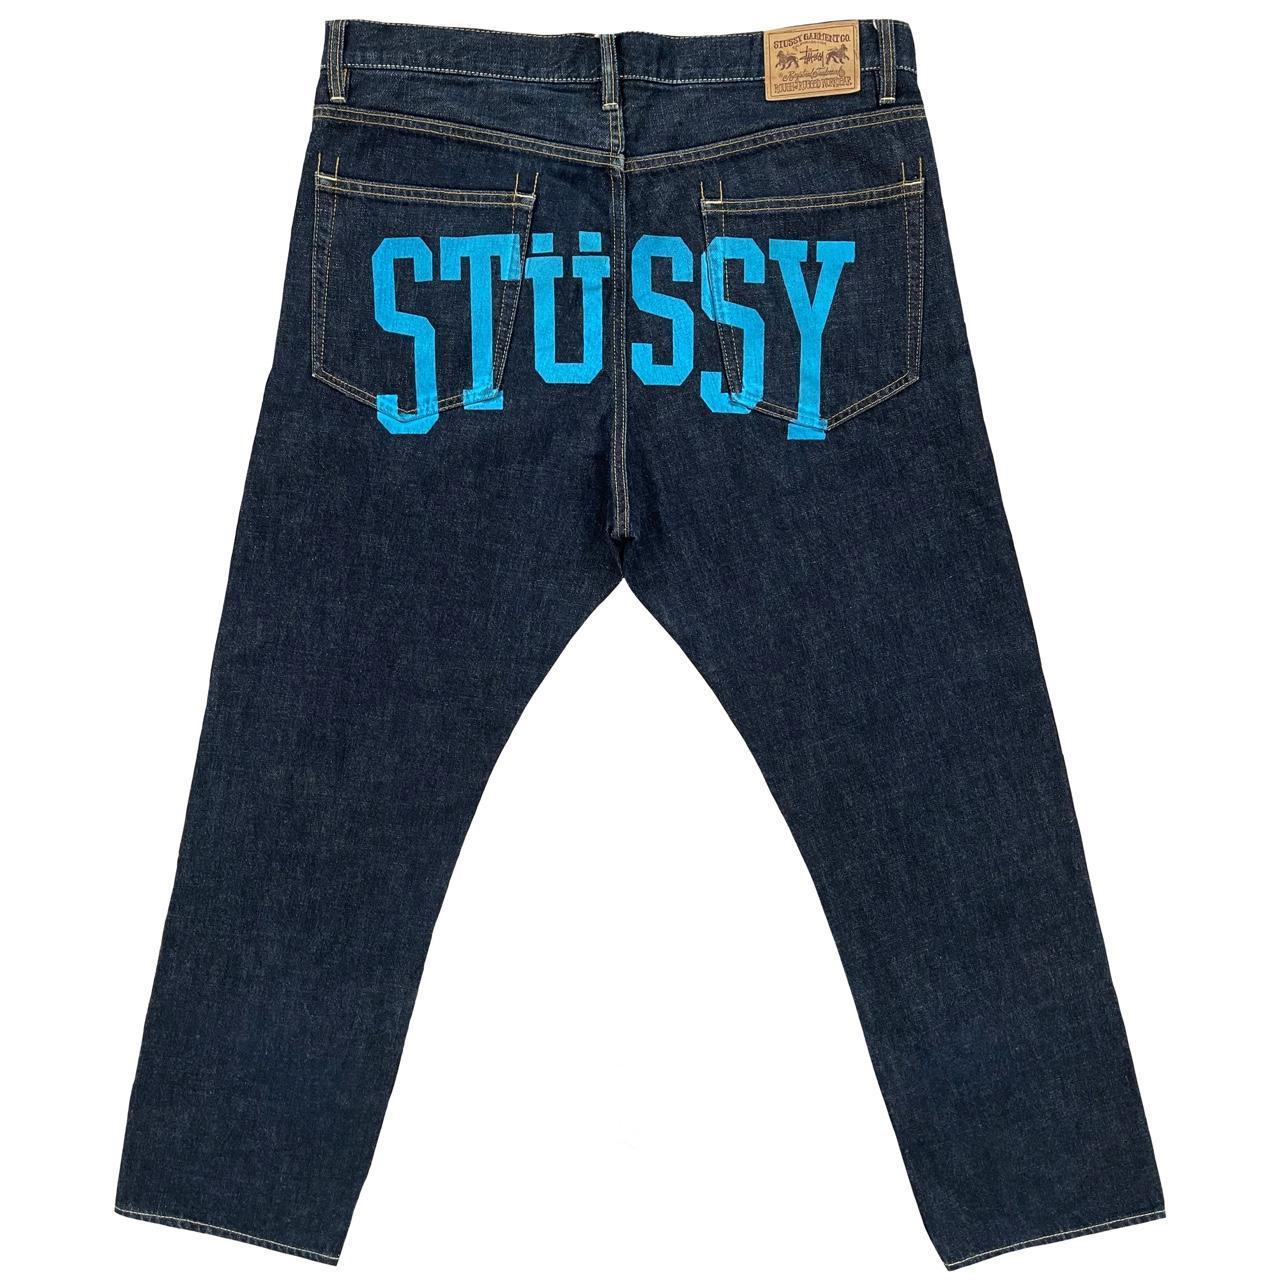 Stussy Jeans - Known Source